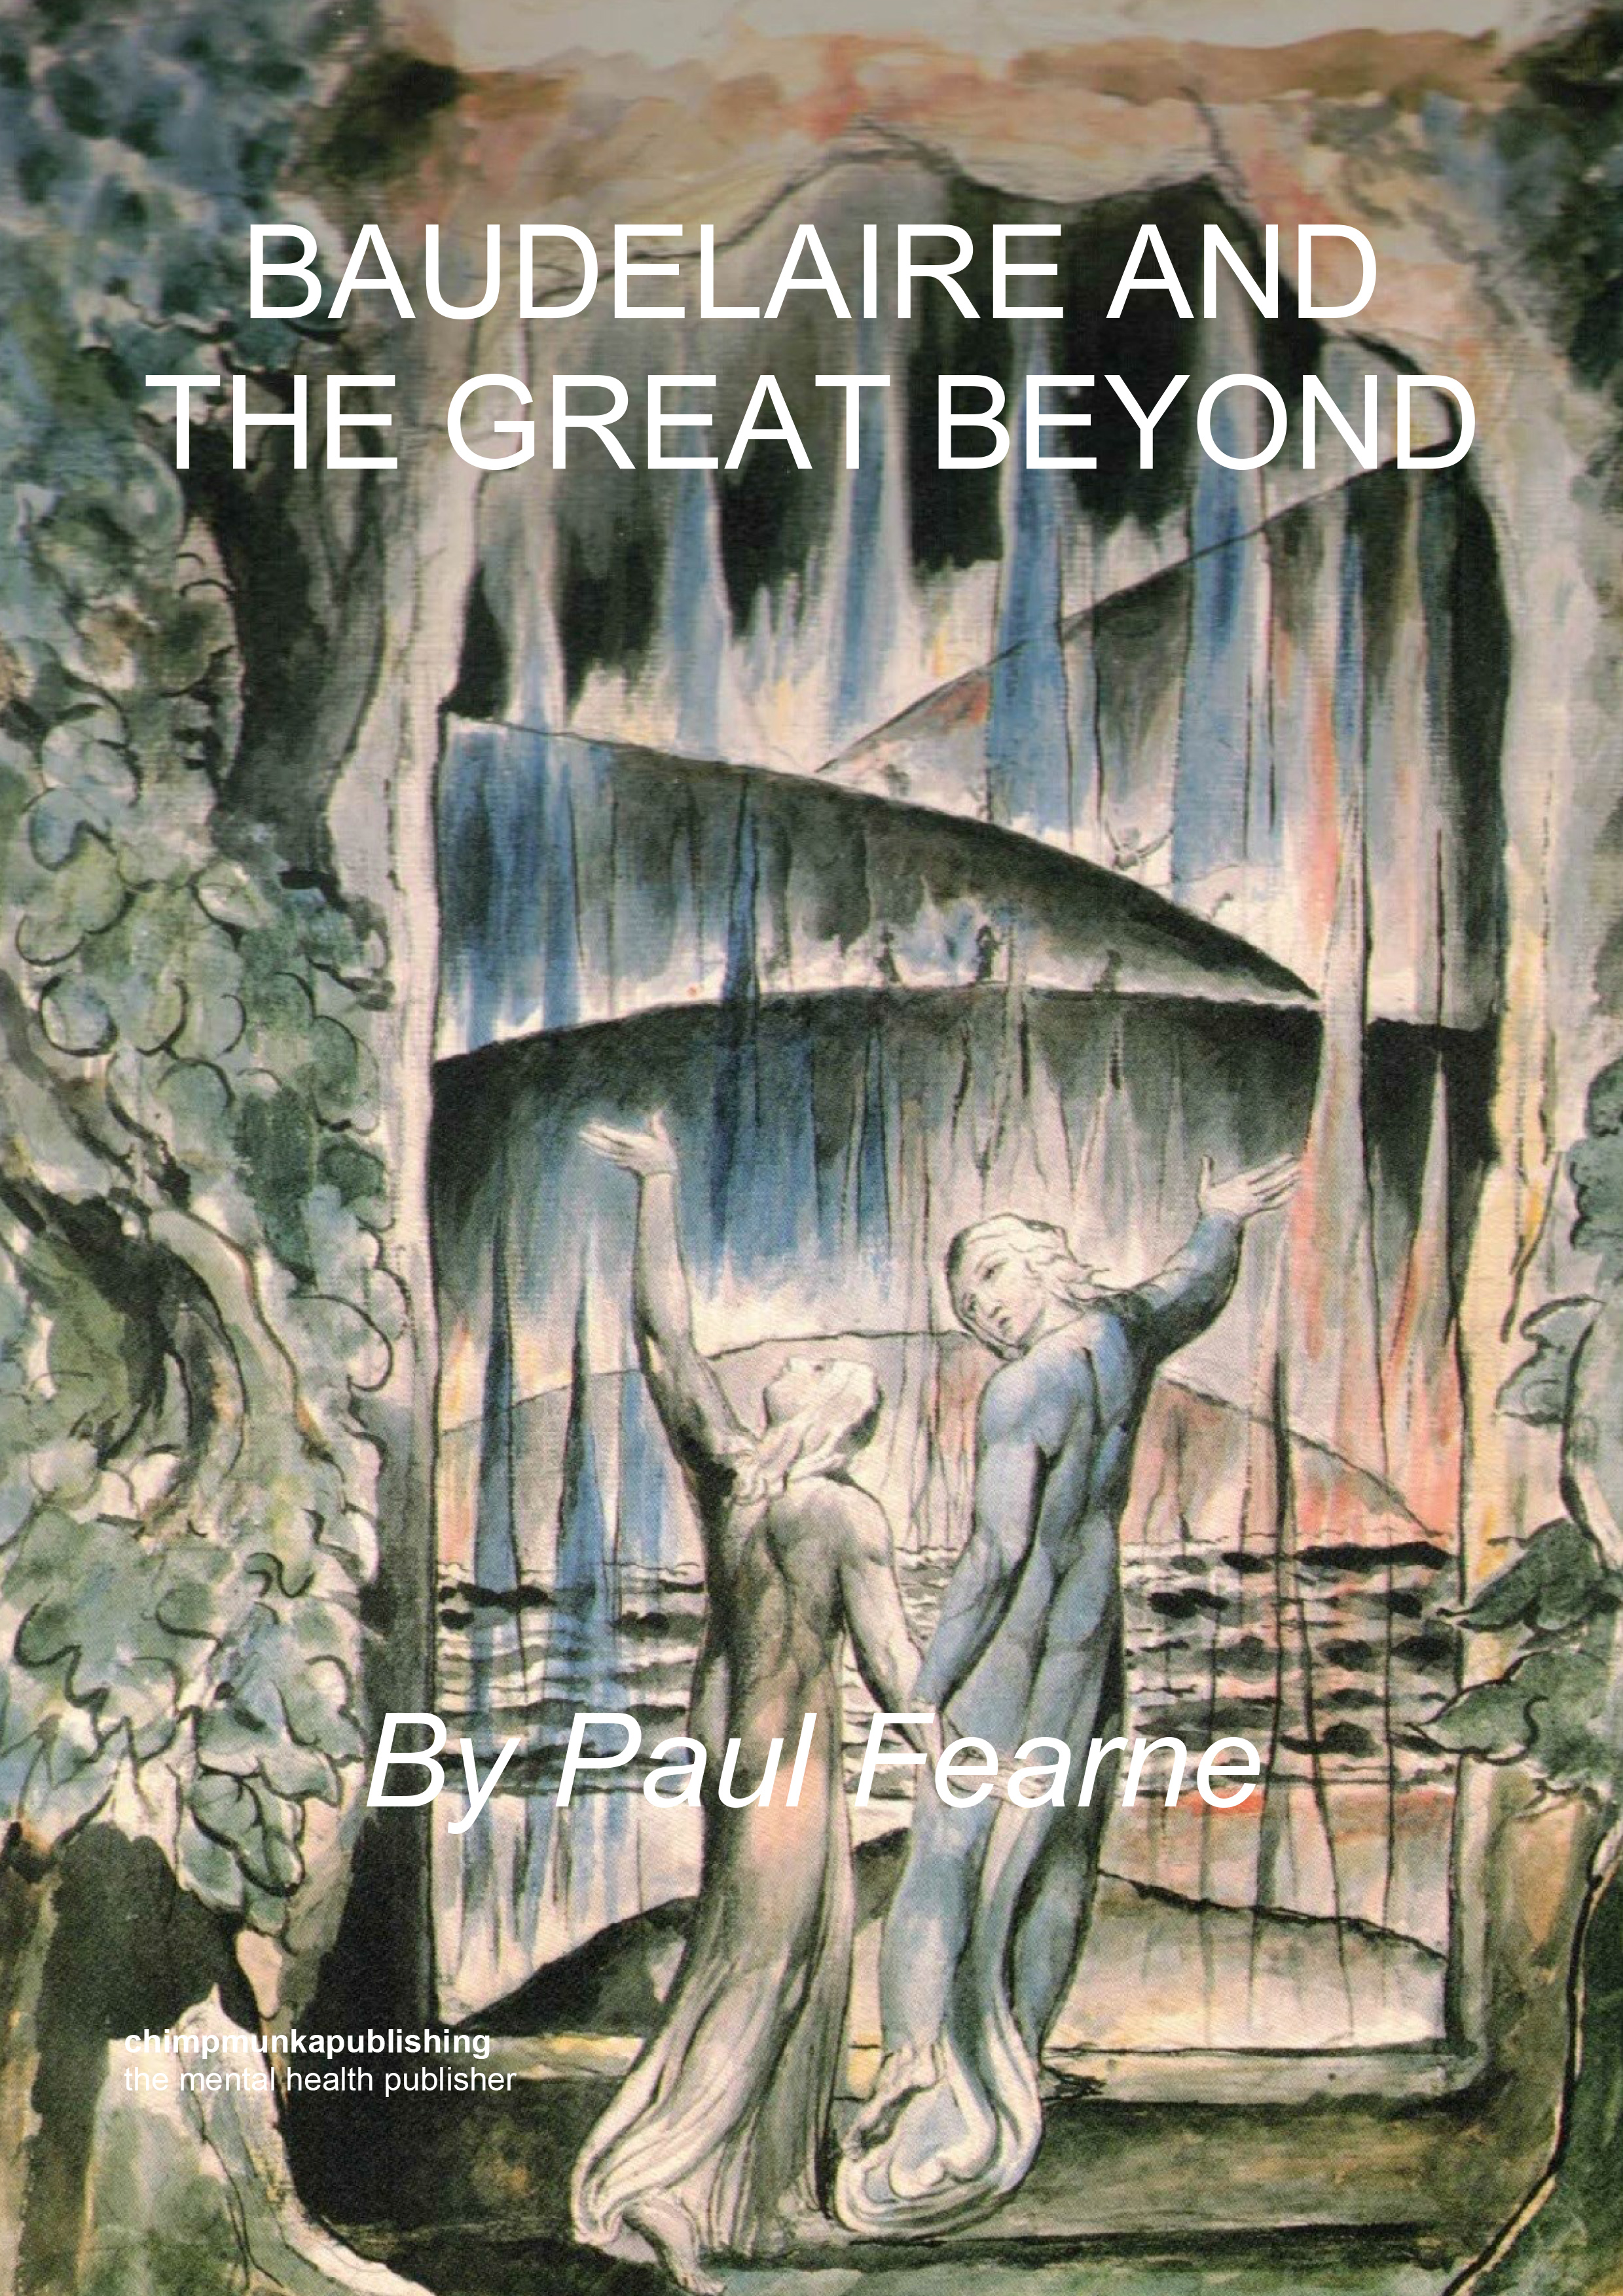 BAUDELAIRE AND THE GREAT BEYOND